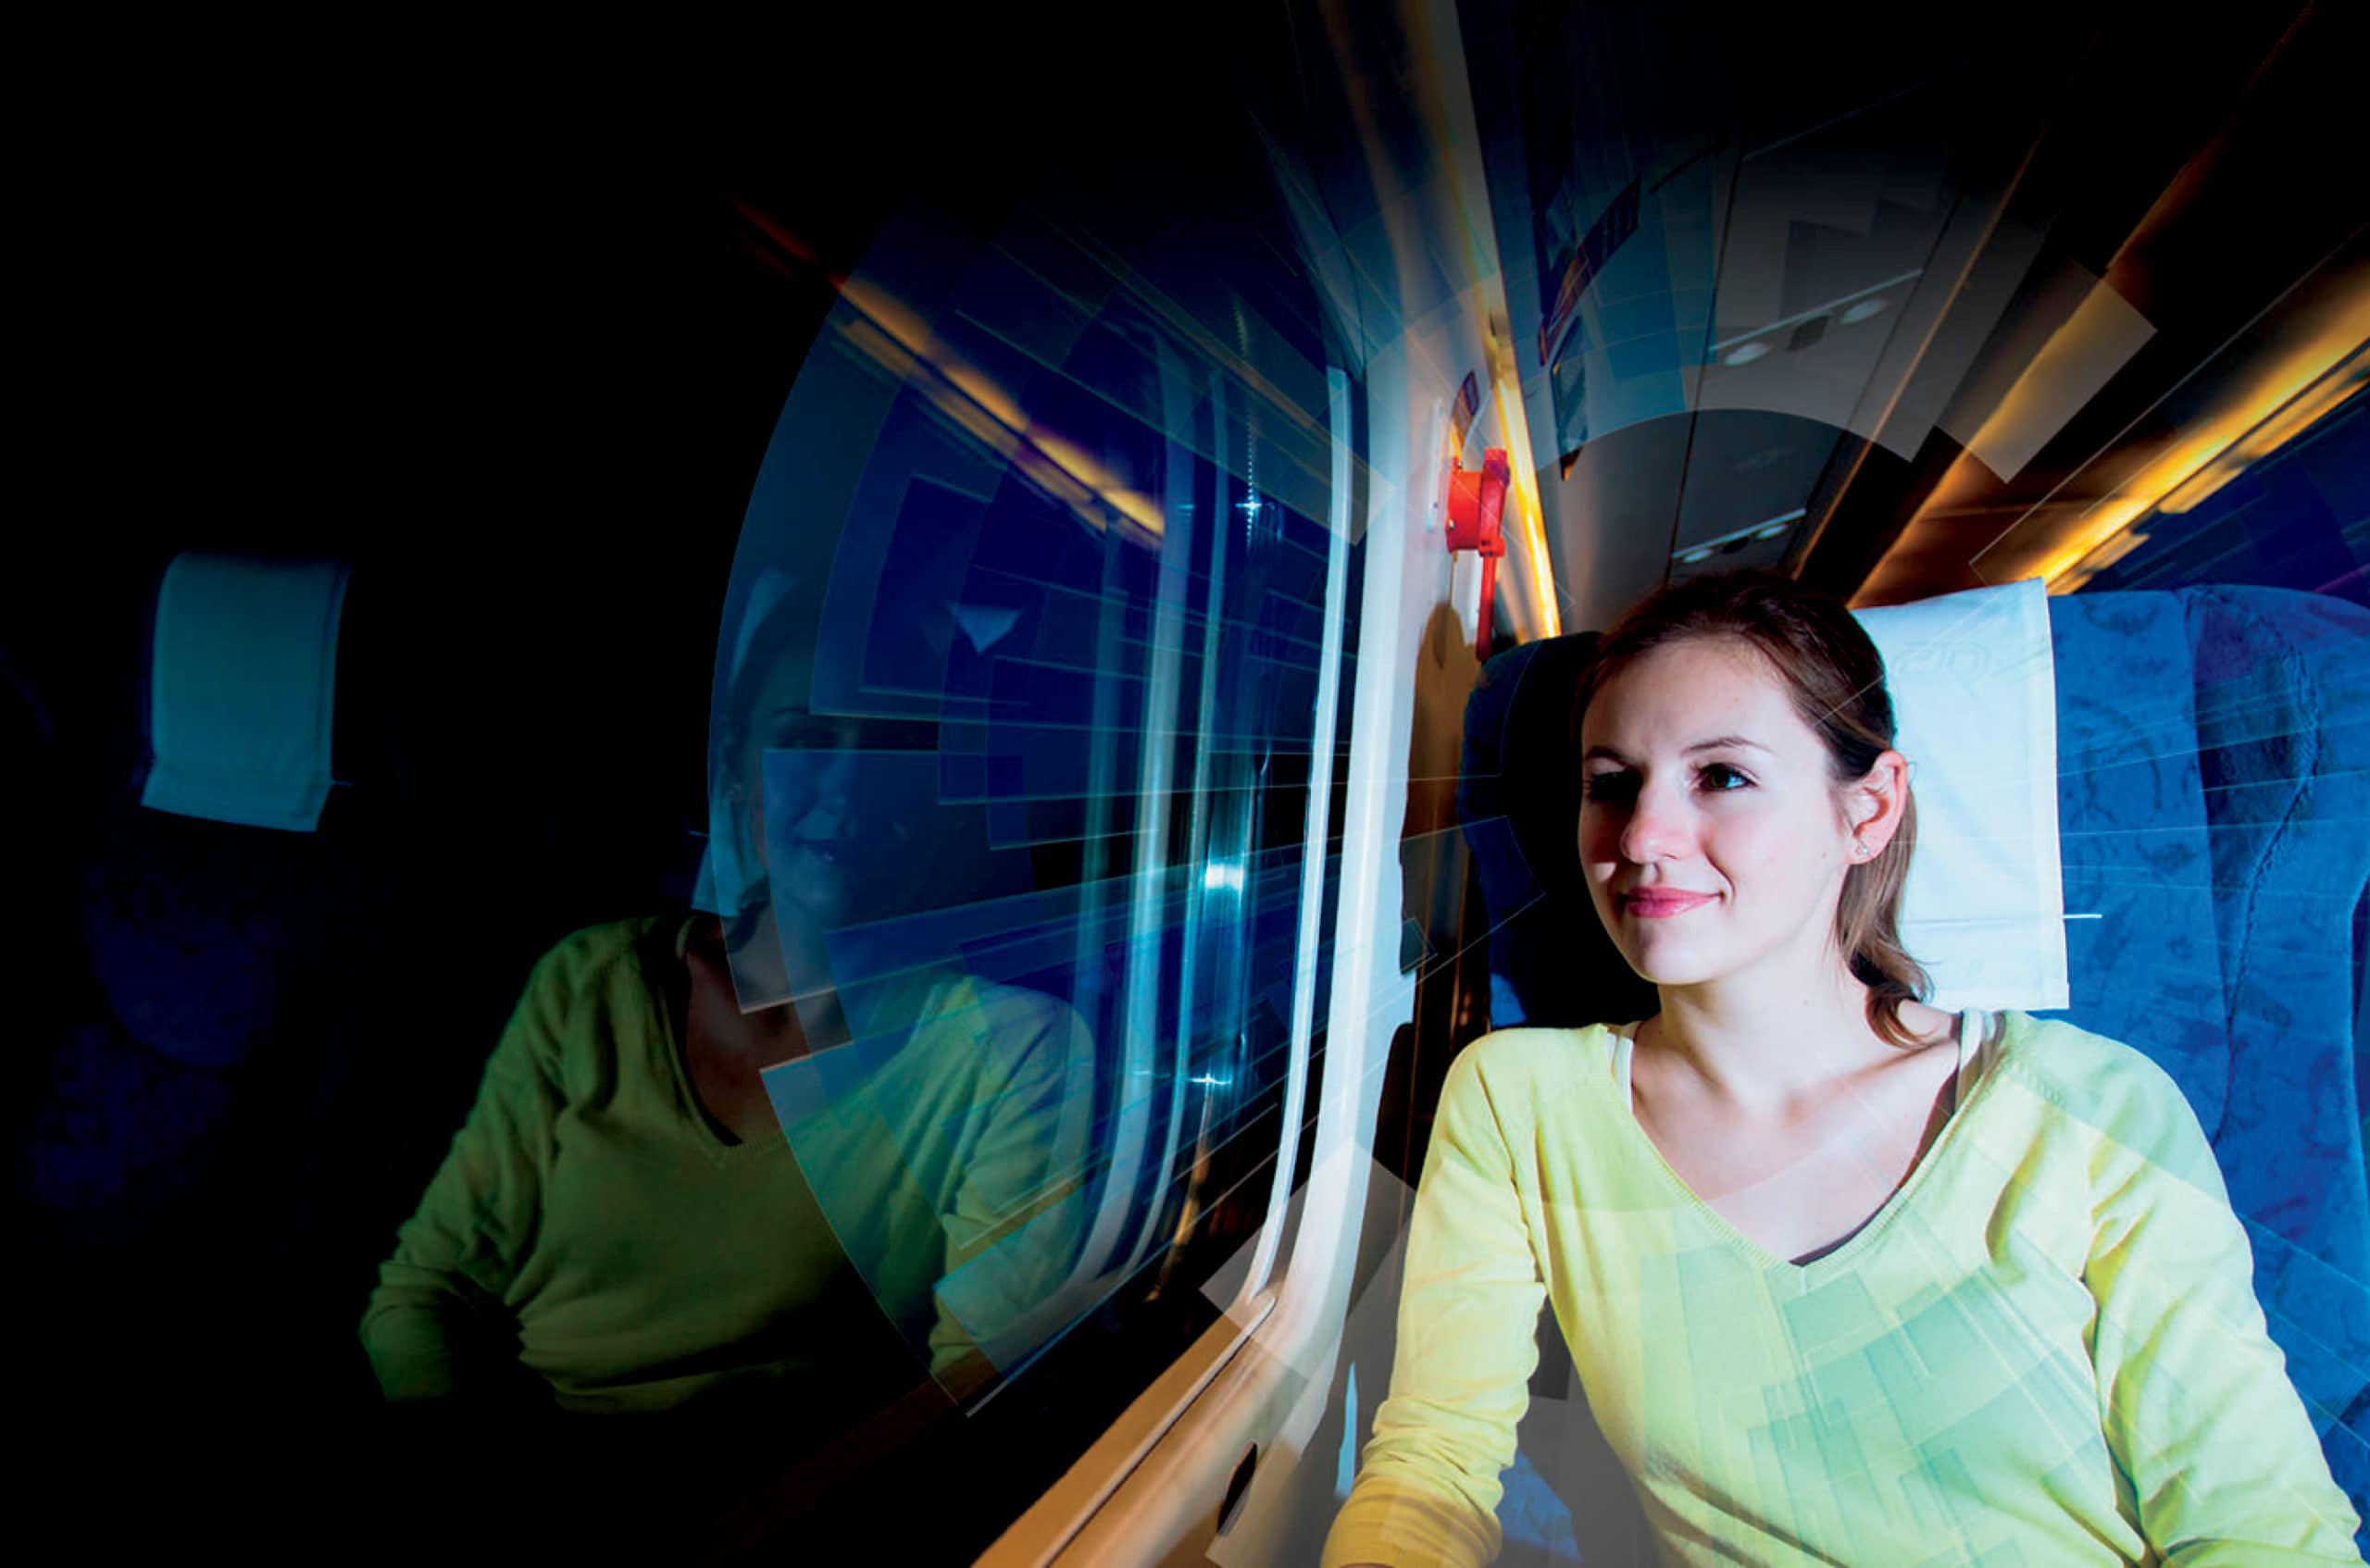 Silentium develops noise-reduction technology for trains, airports and airplanes. Photo: Silentium